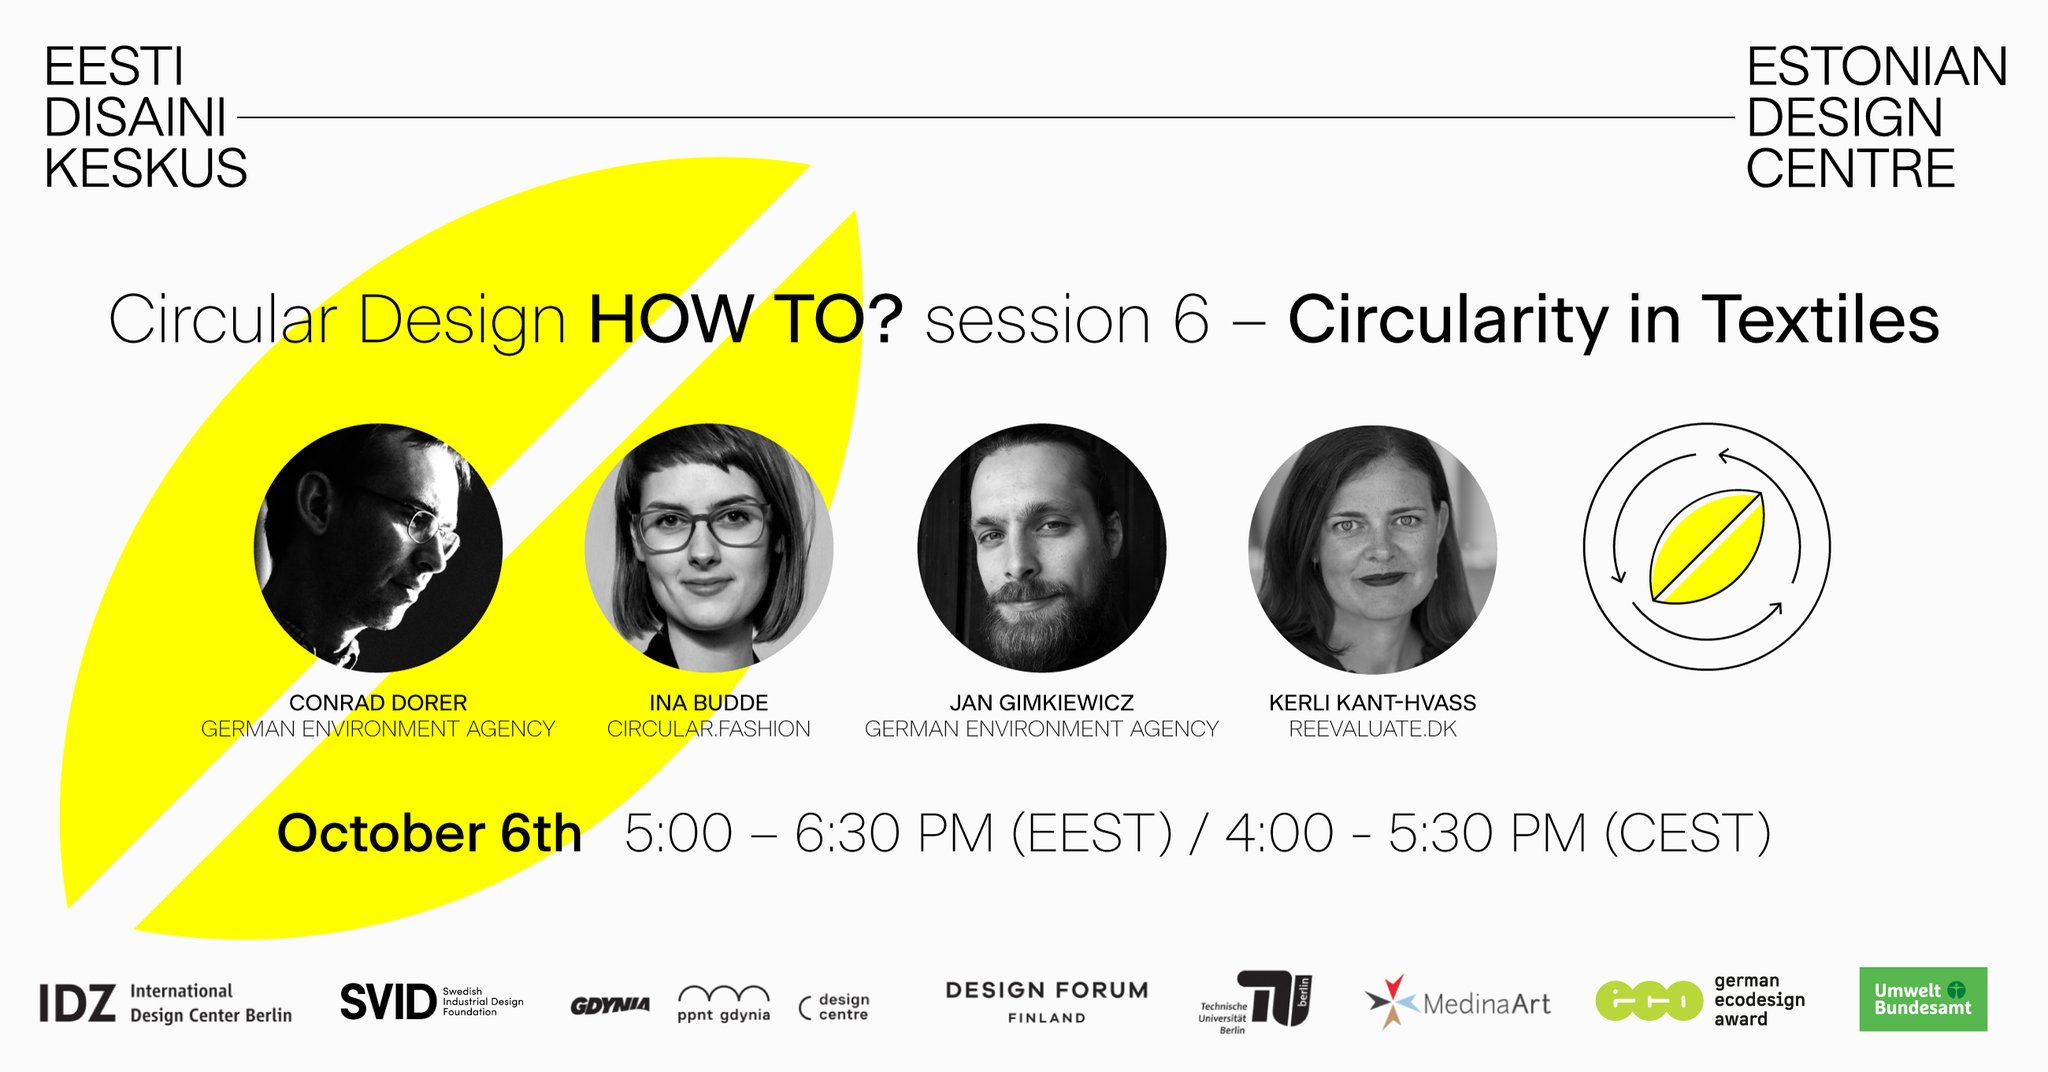 Session 6 - CIRCULARITY IN TEXTILES (6 Oct 2021)